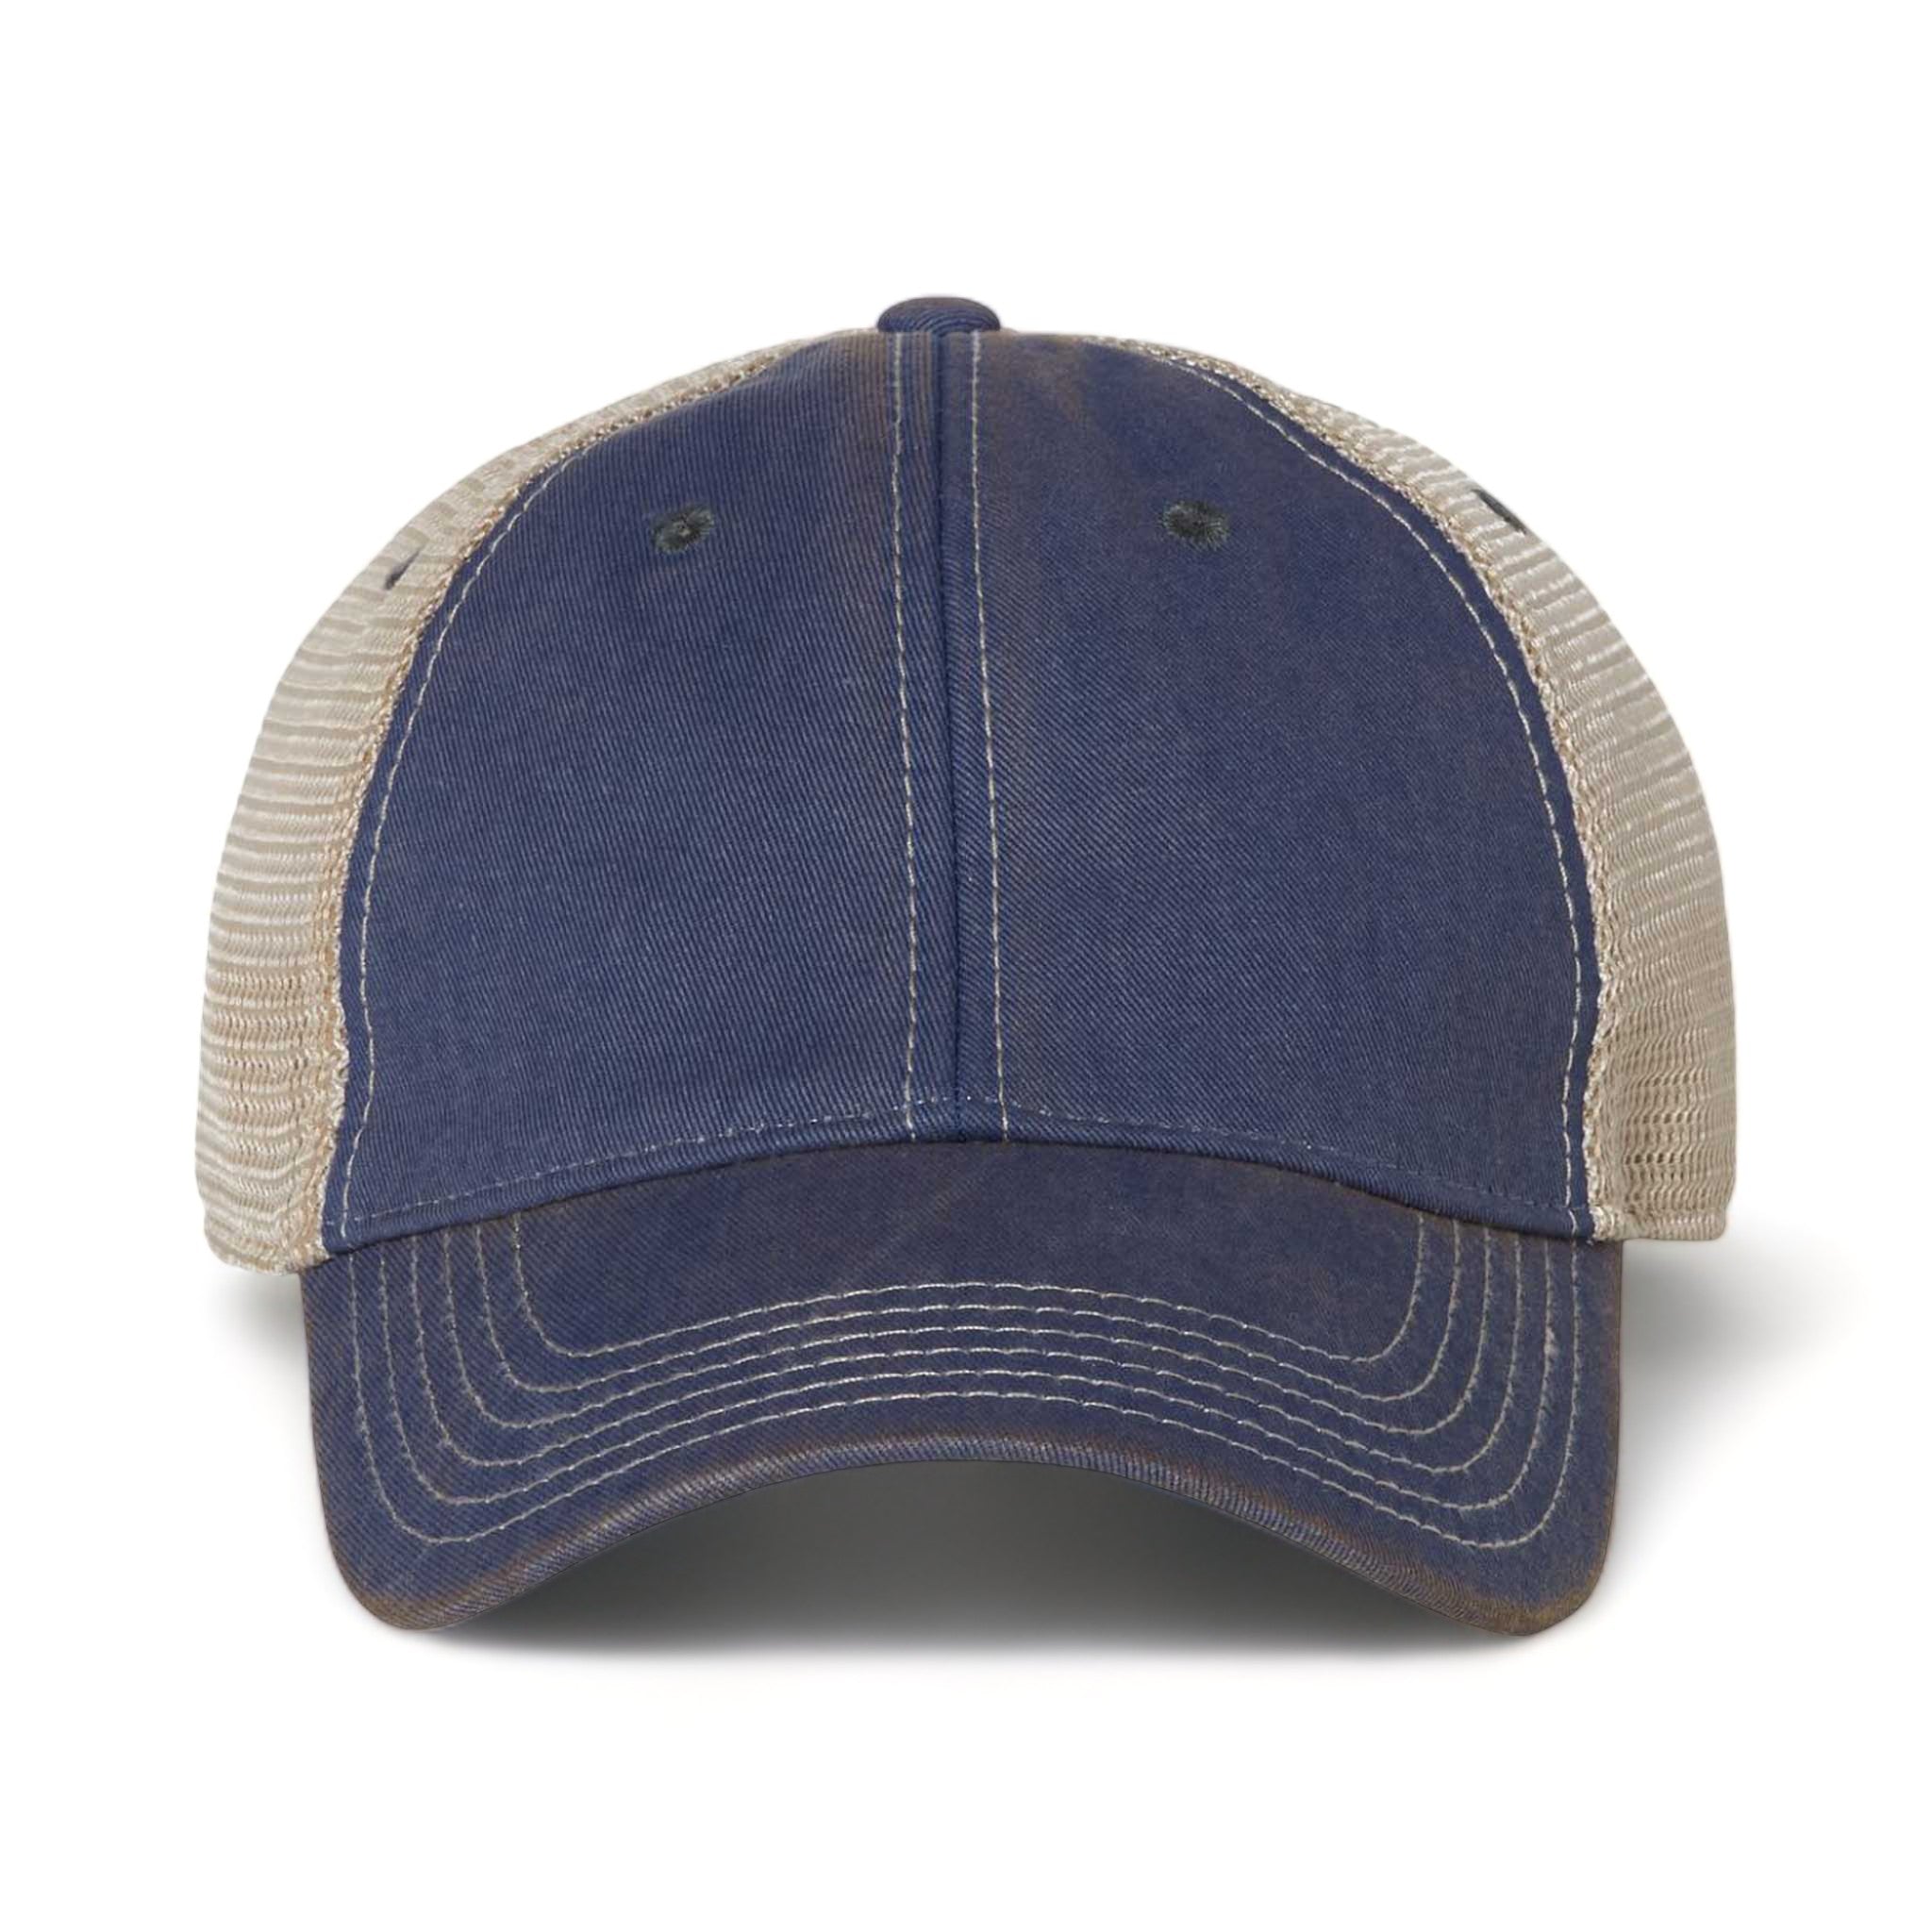 Front view of LEGACY OFA custom hat in royal and khaki